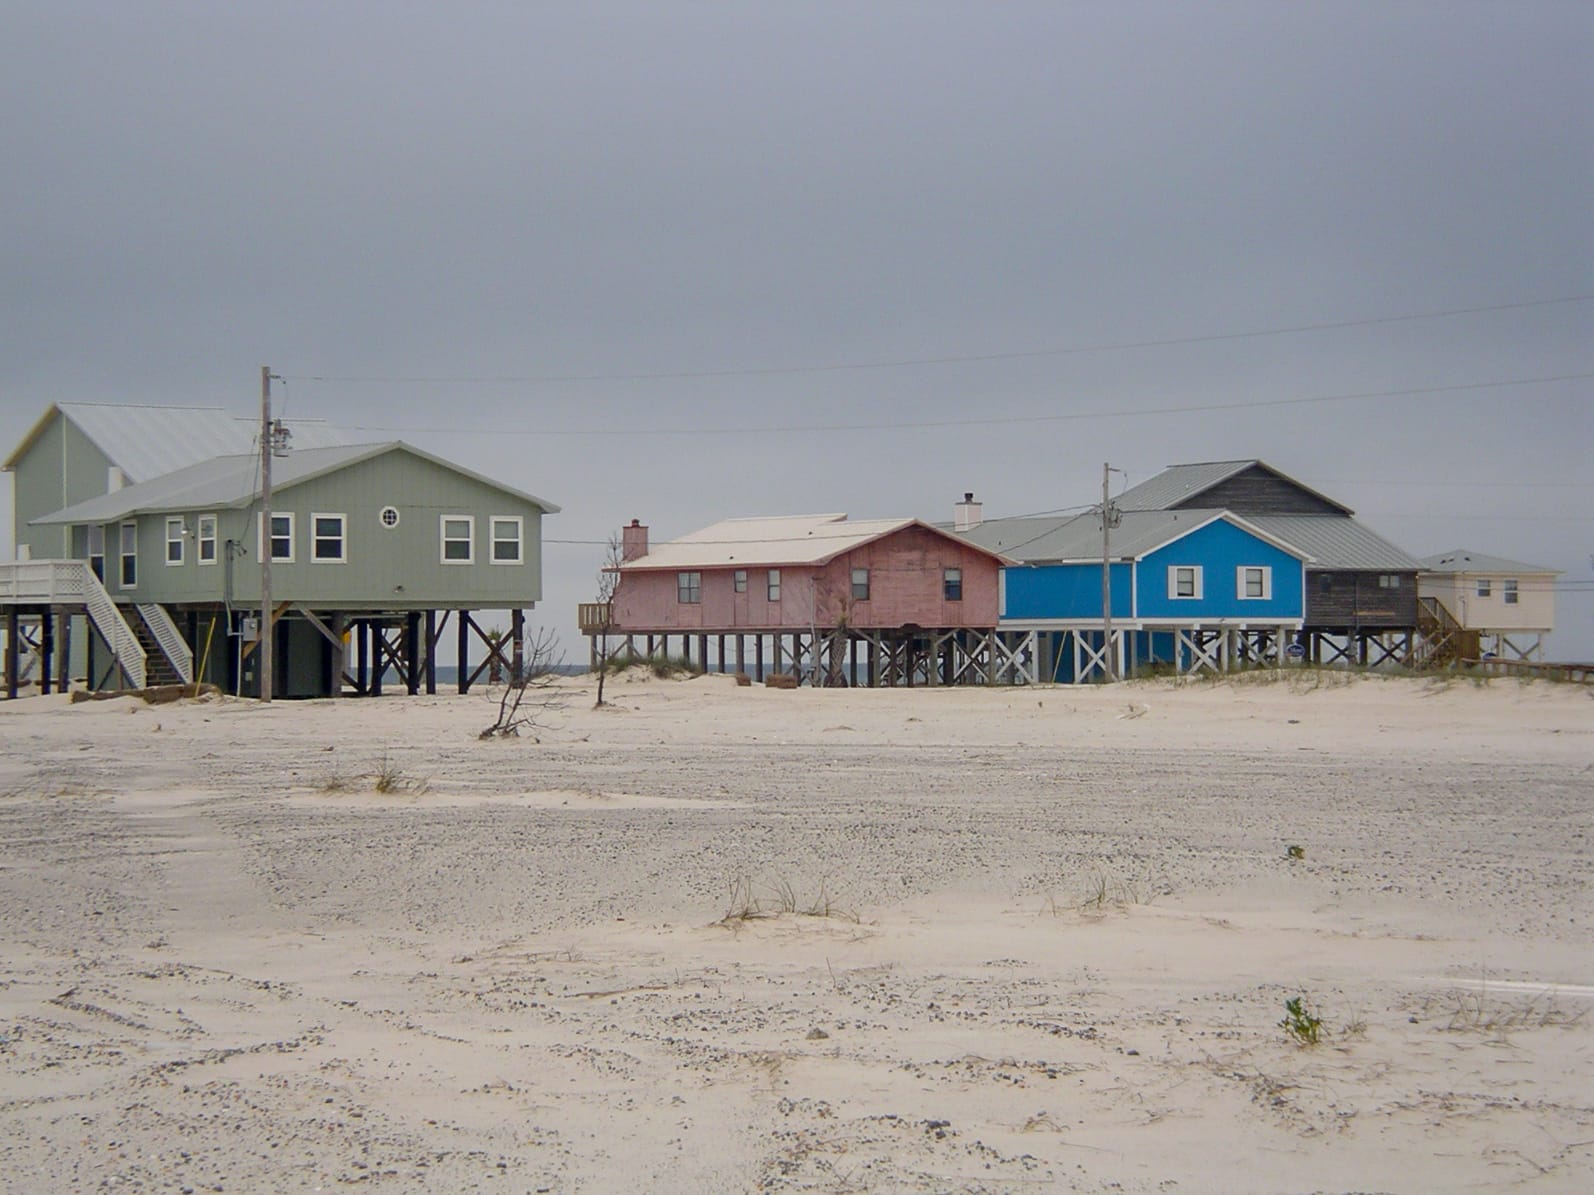 Colorful houses on stilts